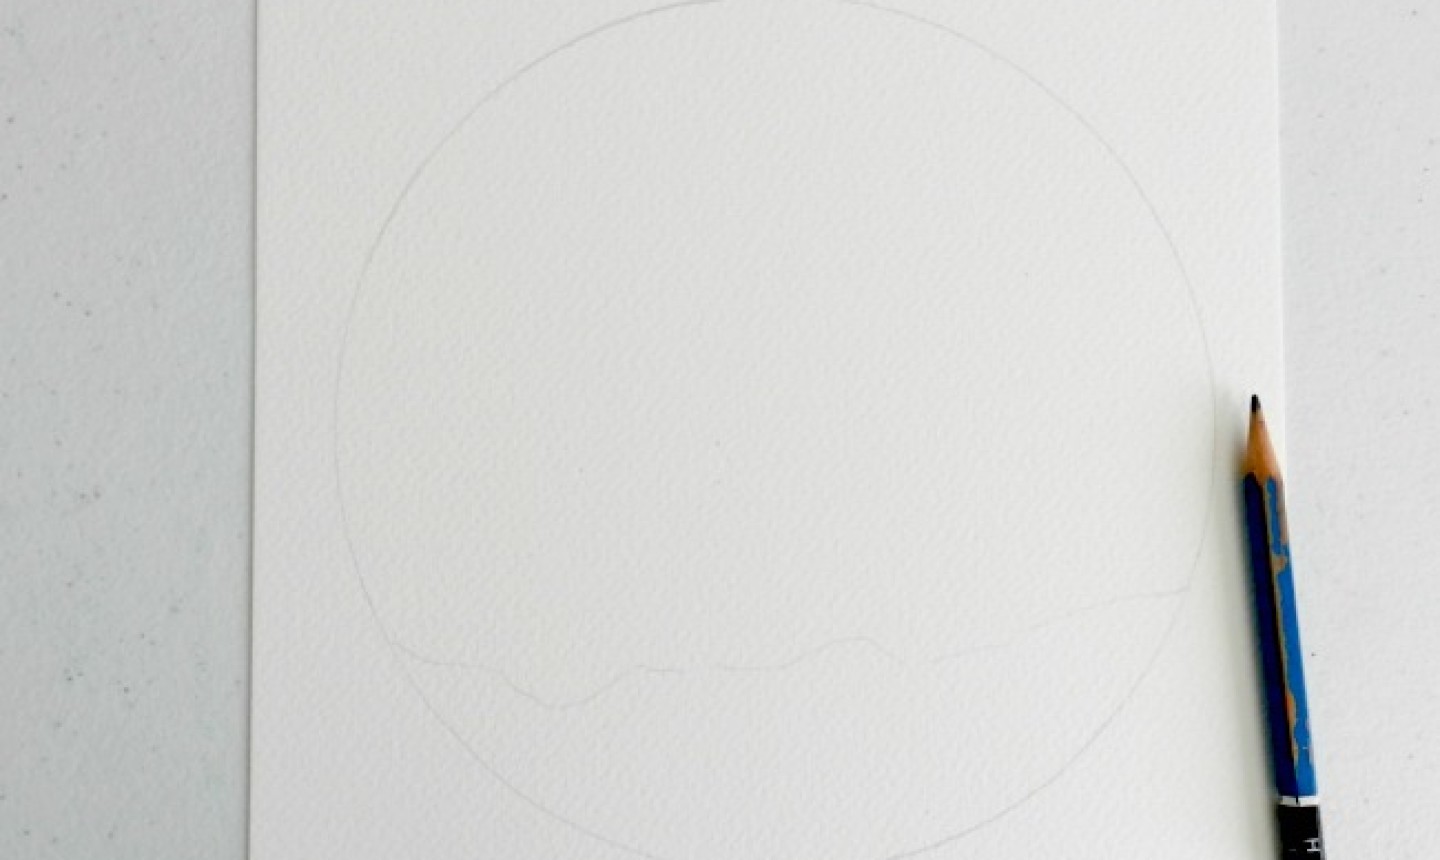 circle on watercolor paper drawn in pencil